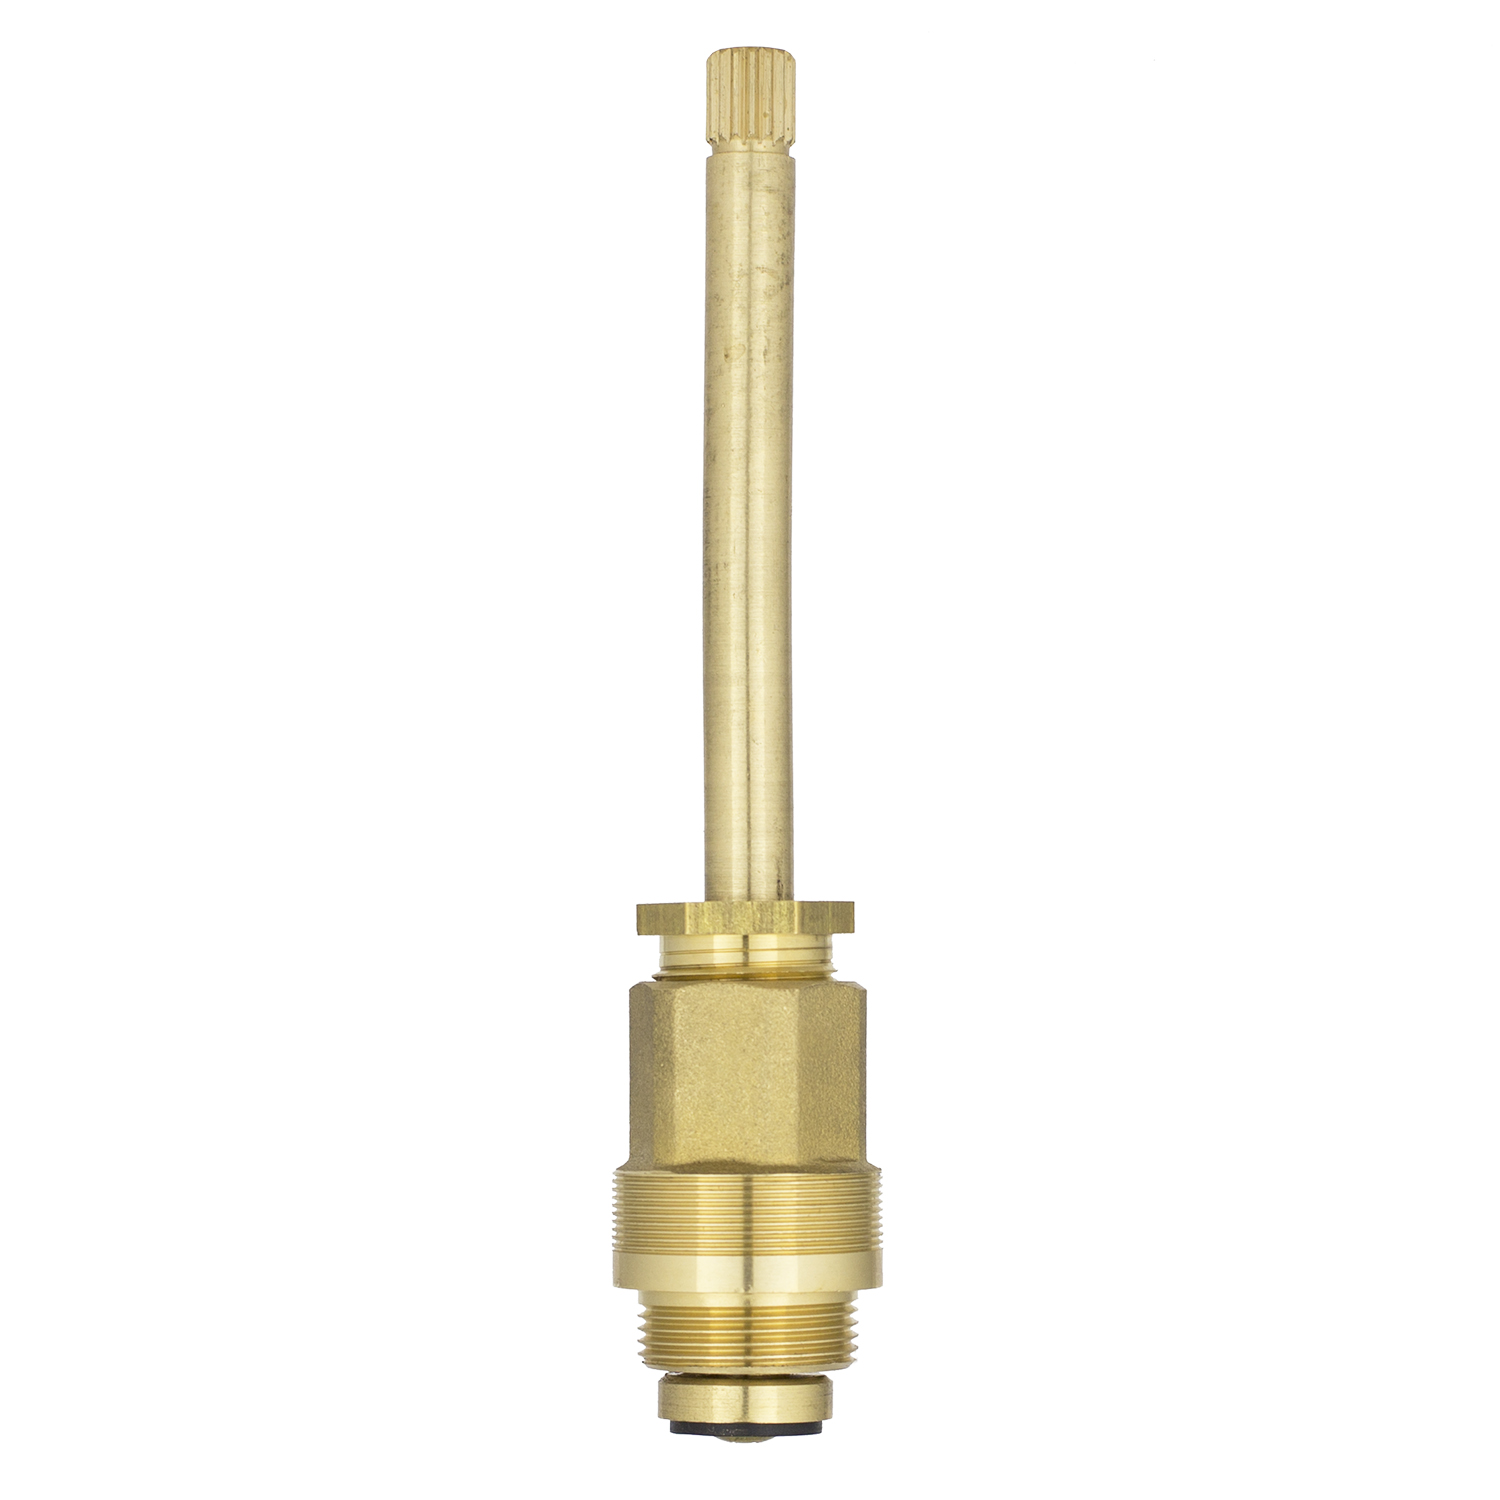 Lasco S-1047-3 Cold/Hot Faucet Stem, Brass, For: 6469 Gerber Tub and Shower Faucets